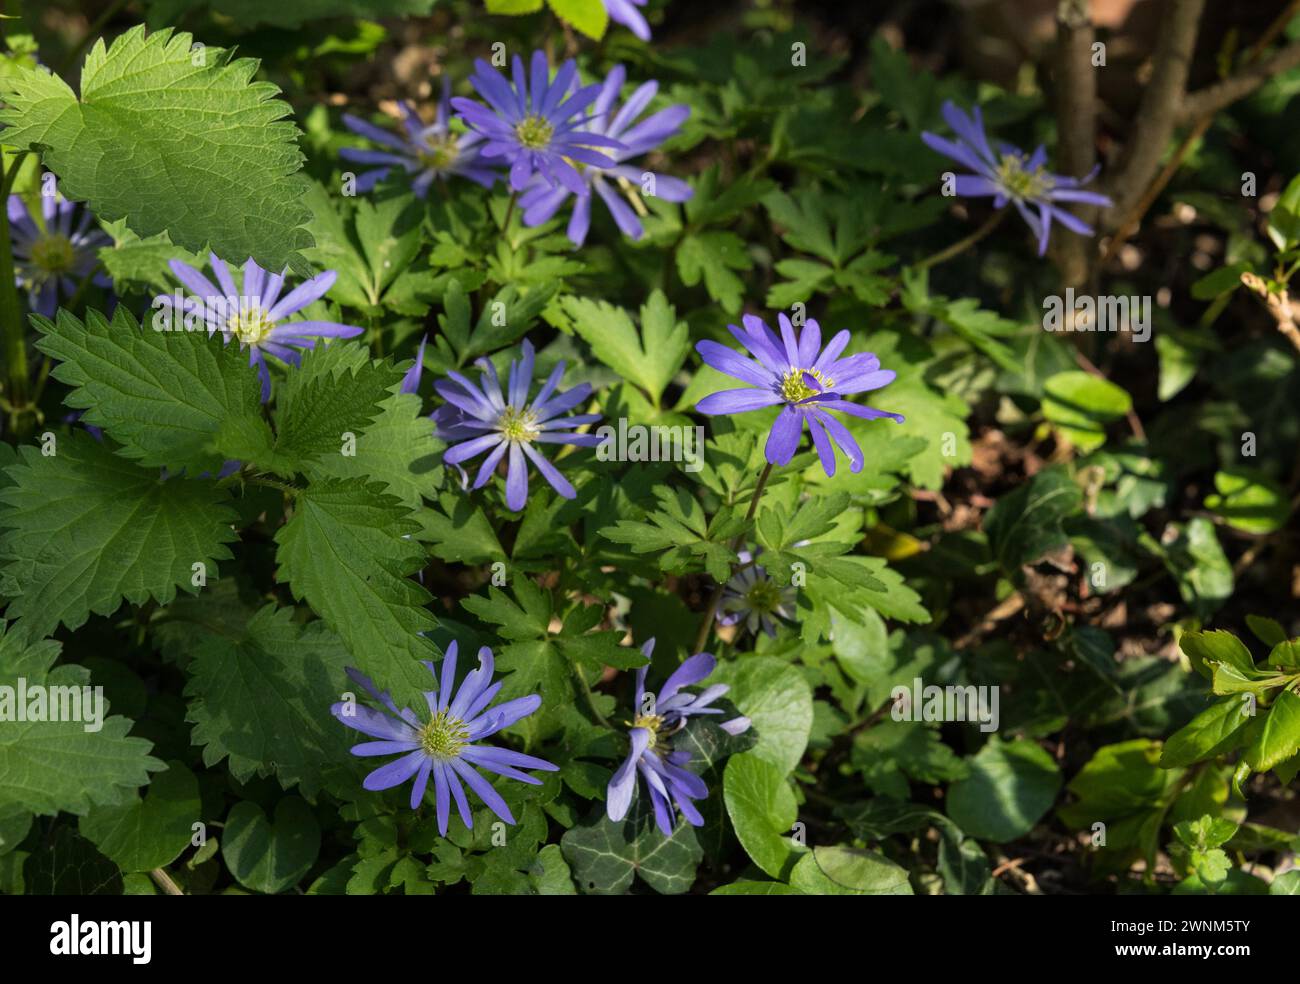 Spring scene with blue flowers and green leaves in the sunlight Blue star Scilla between nettle leaves Urtica Stock Photo